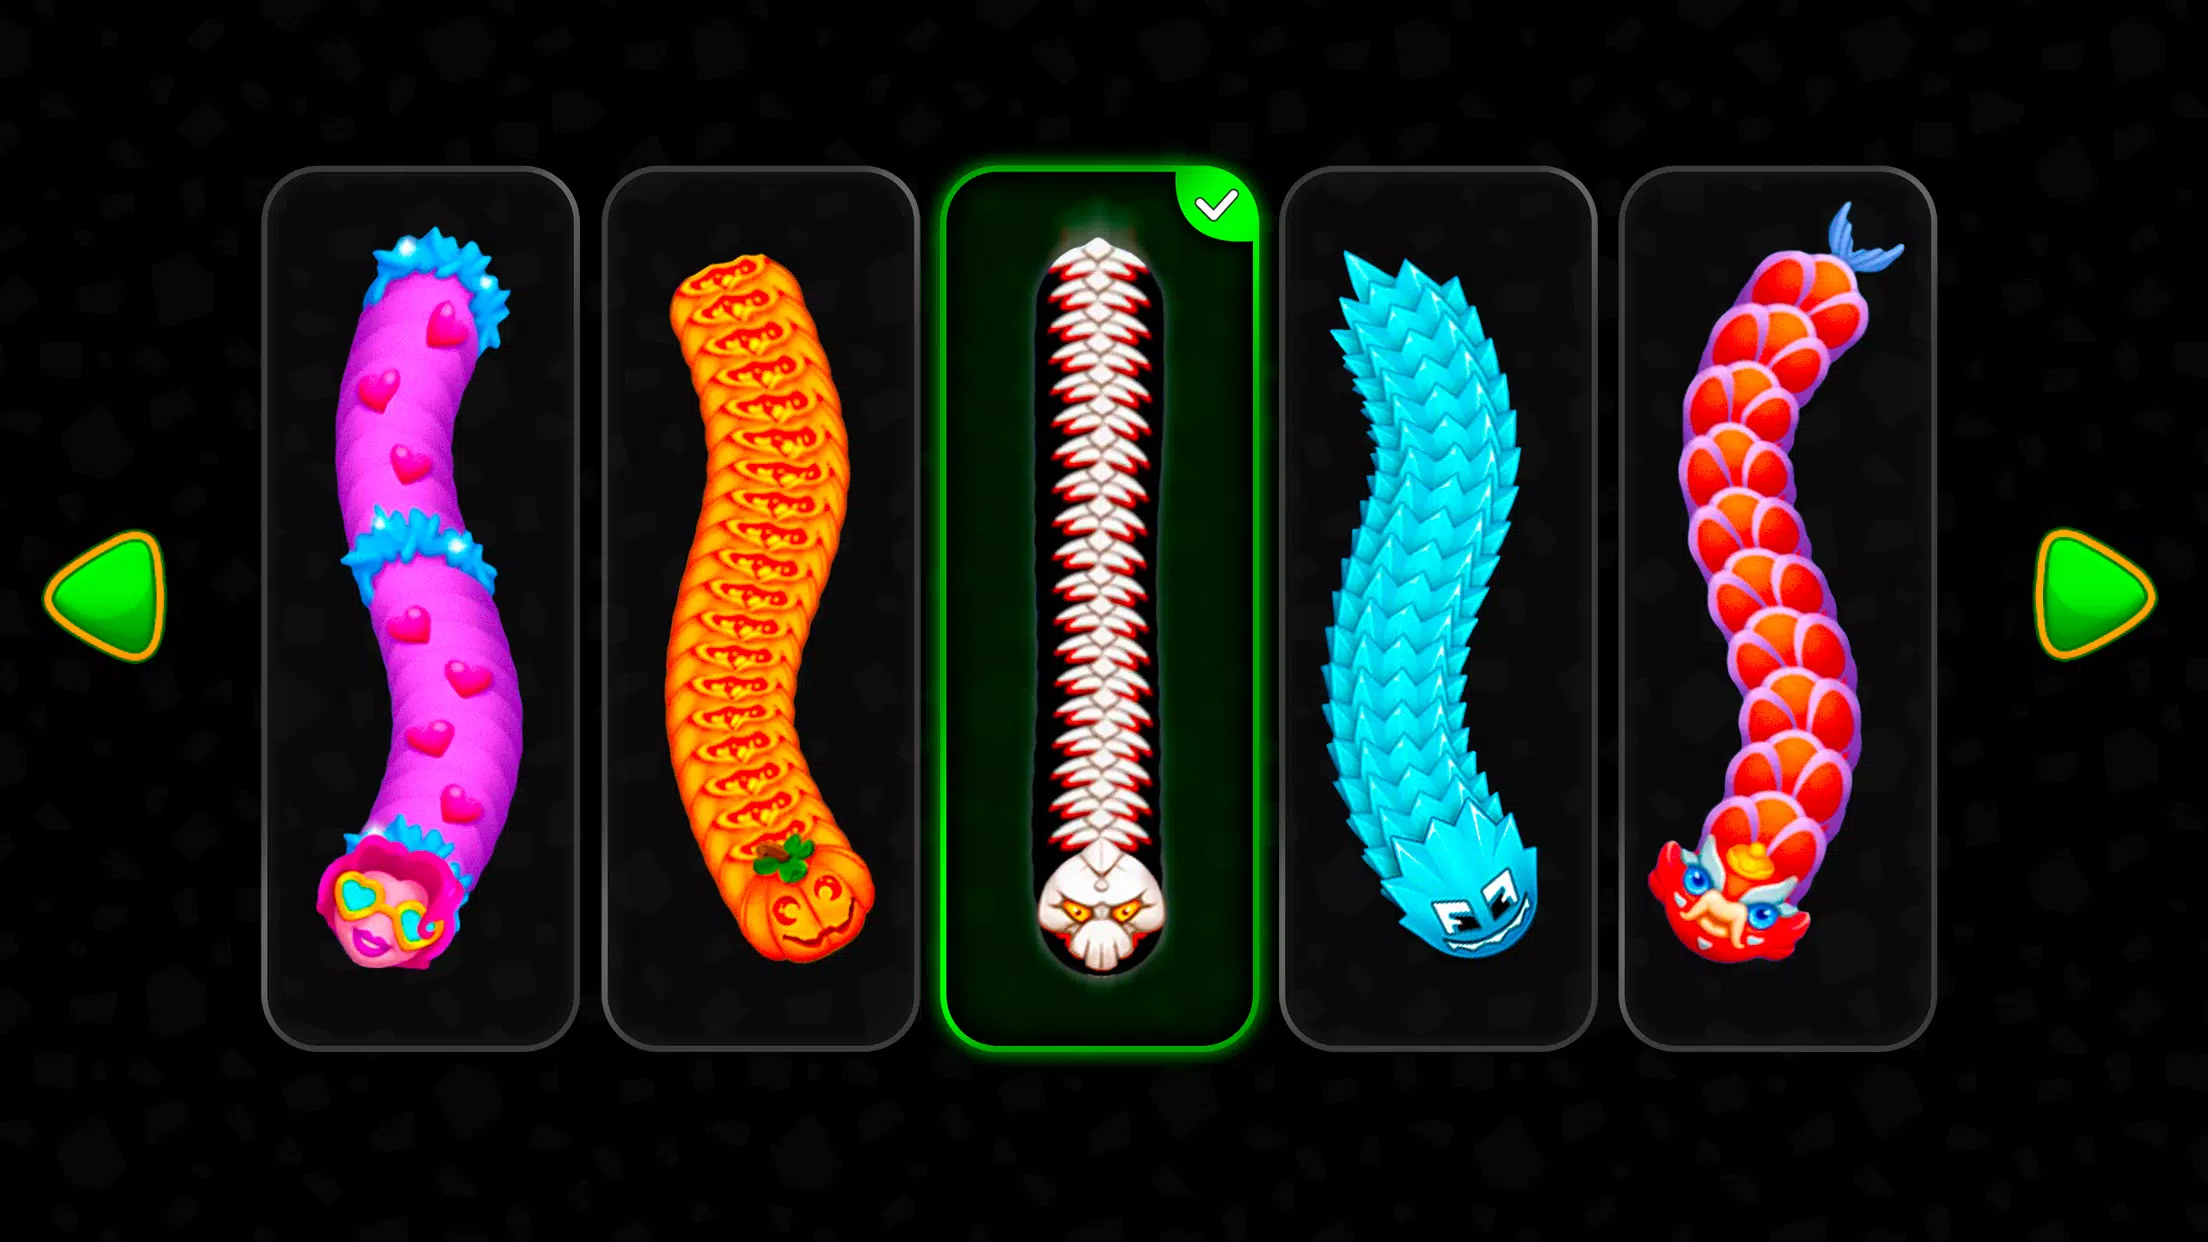 IMMORTAL SNAKE! - Slither.io HIGH SCORE RECORD GAMEPLAY! (NO SLITHER.IO HACK  / MODS MOBILE) 